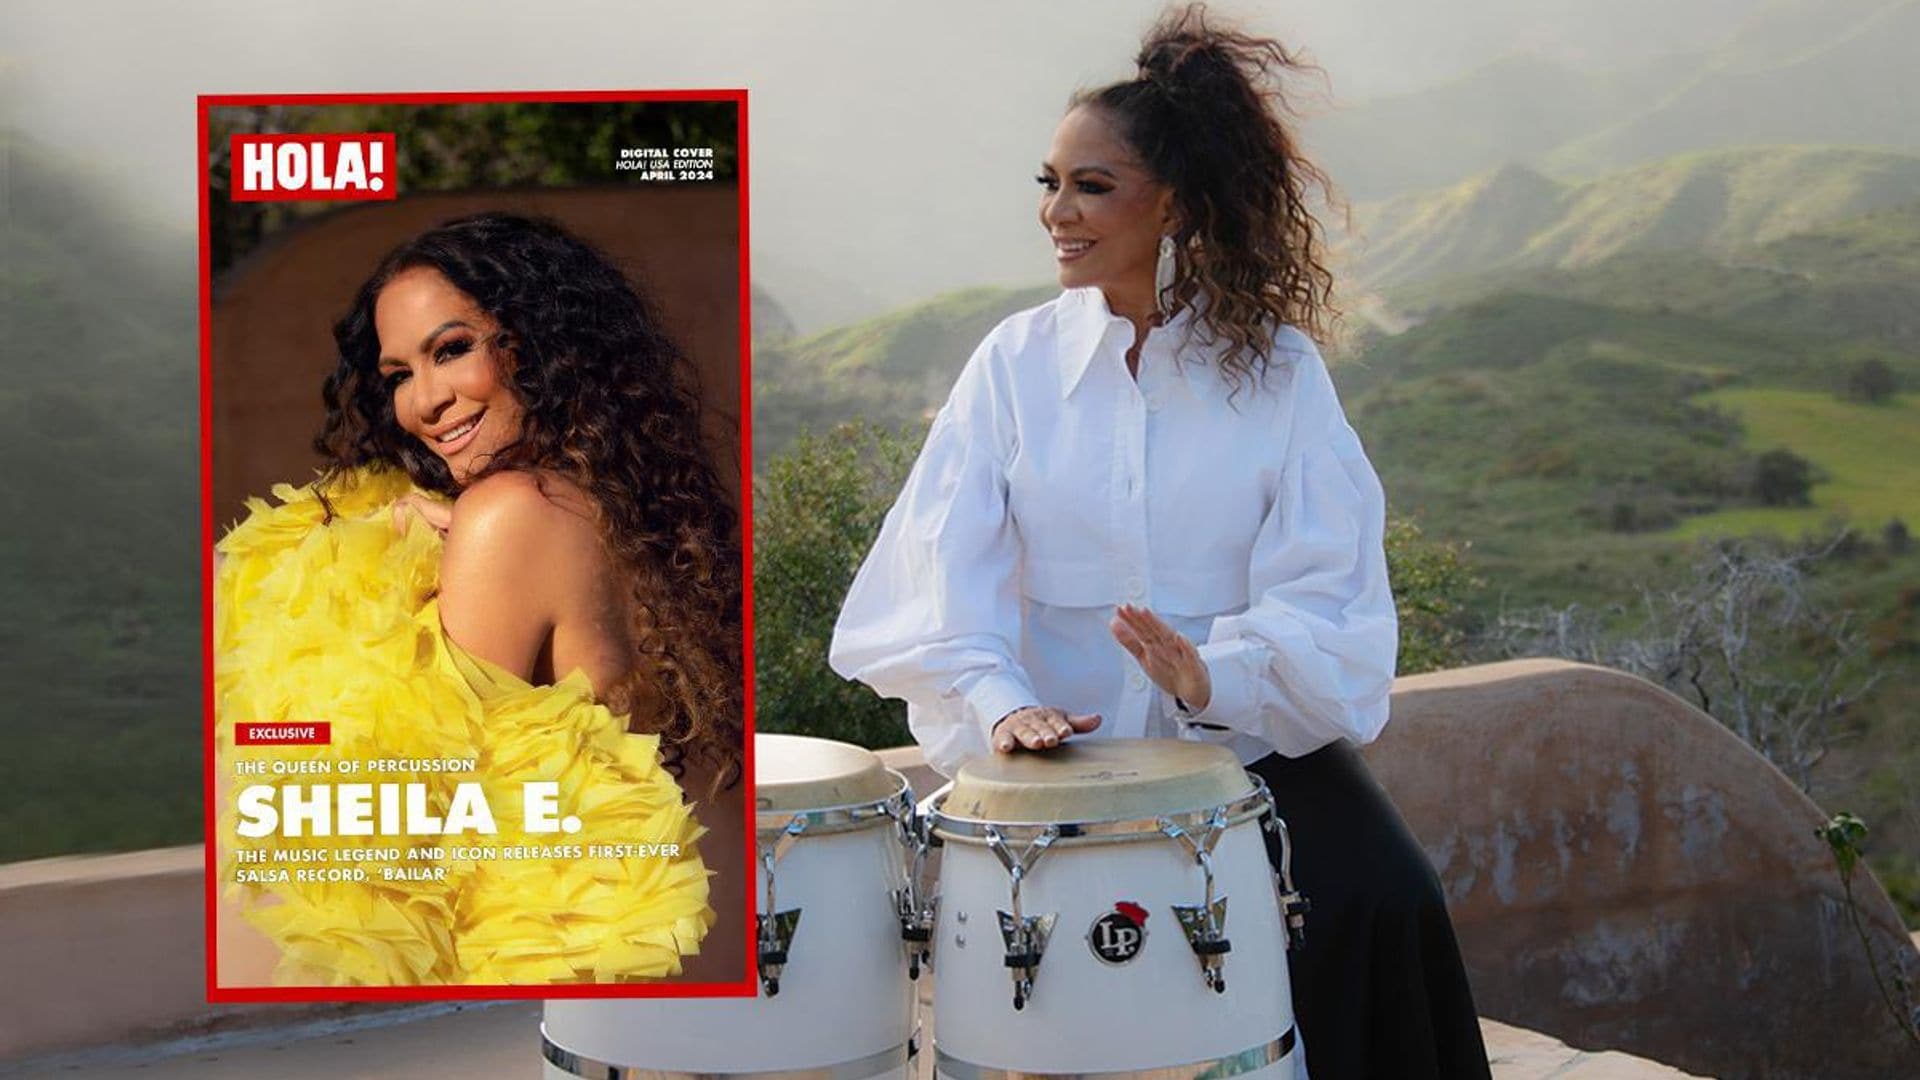 Sheila E.: The music icon and legend releases first-ever salsa record, ‘Bailar’